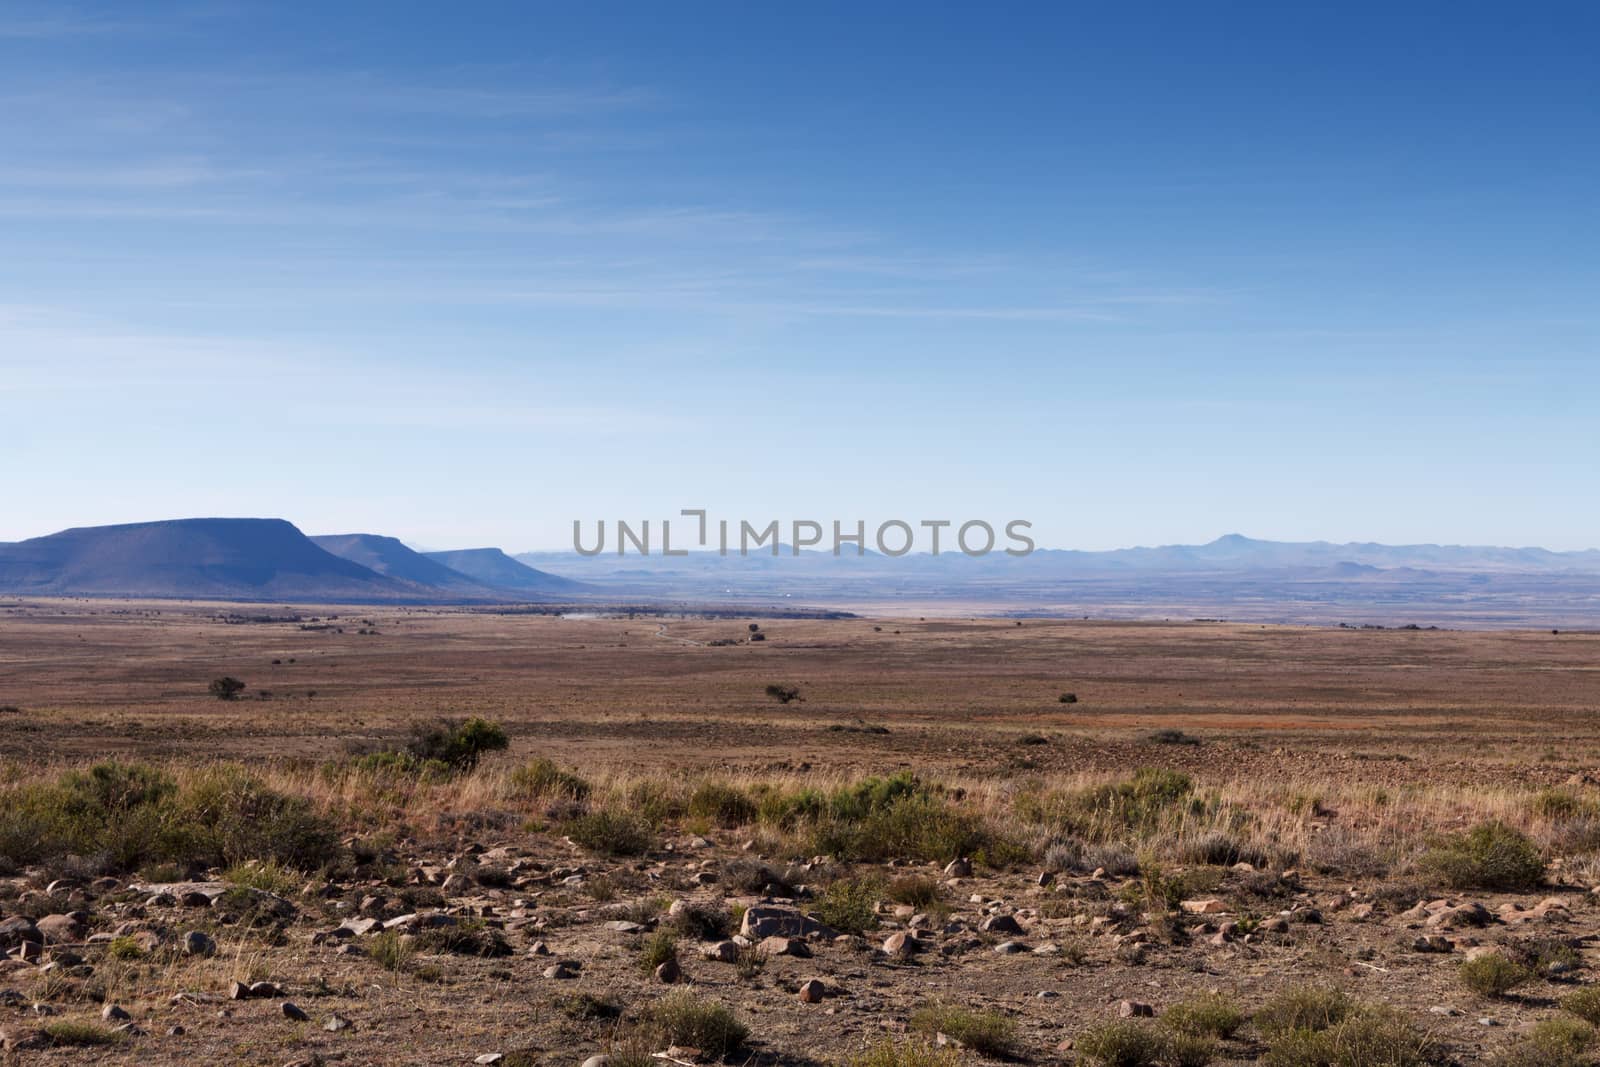 The view of the three mountains in Mountain Zebra National Park.